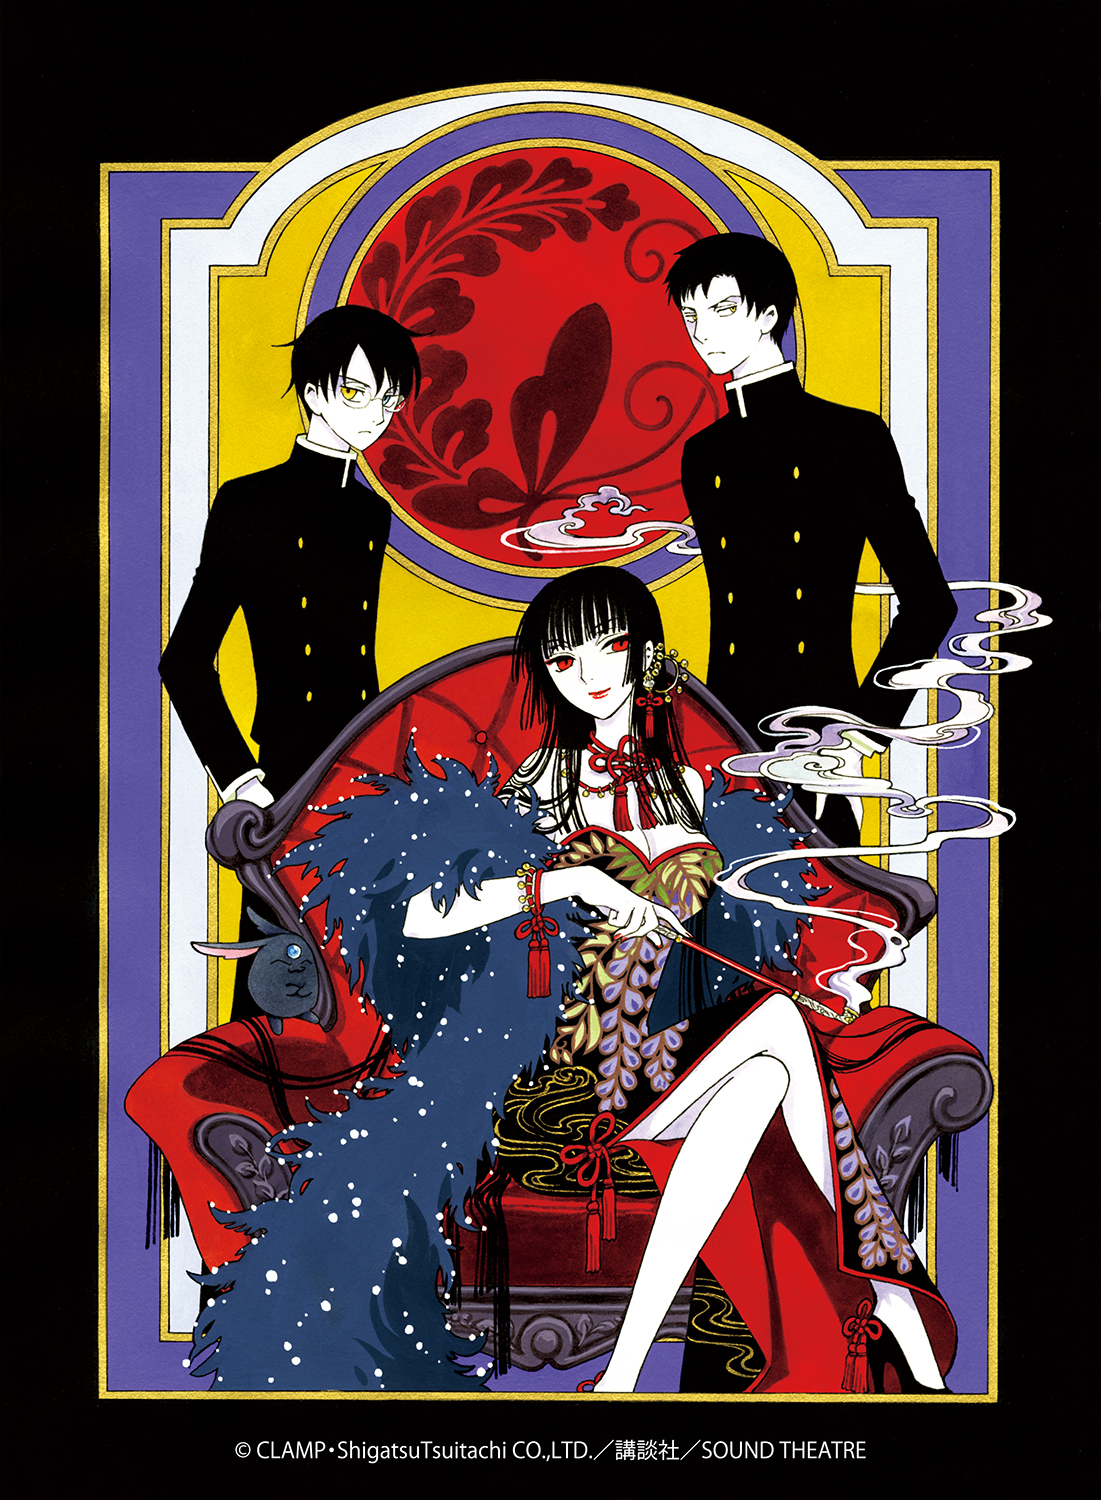 About Clamp Sound Theatre Xxxholic